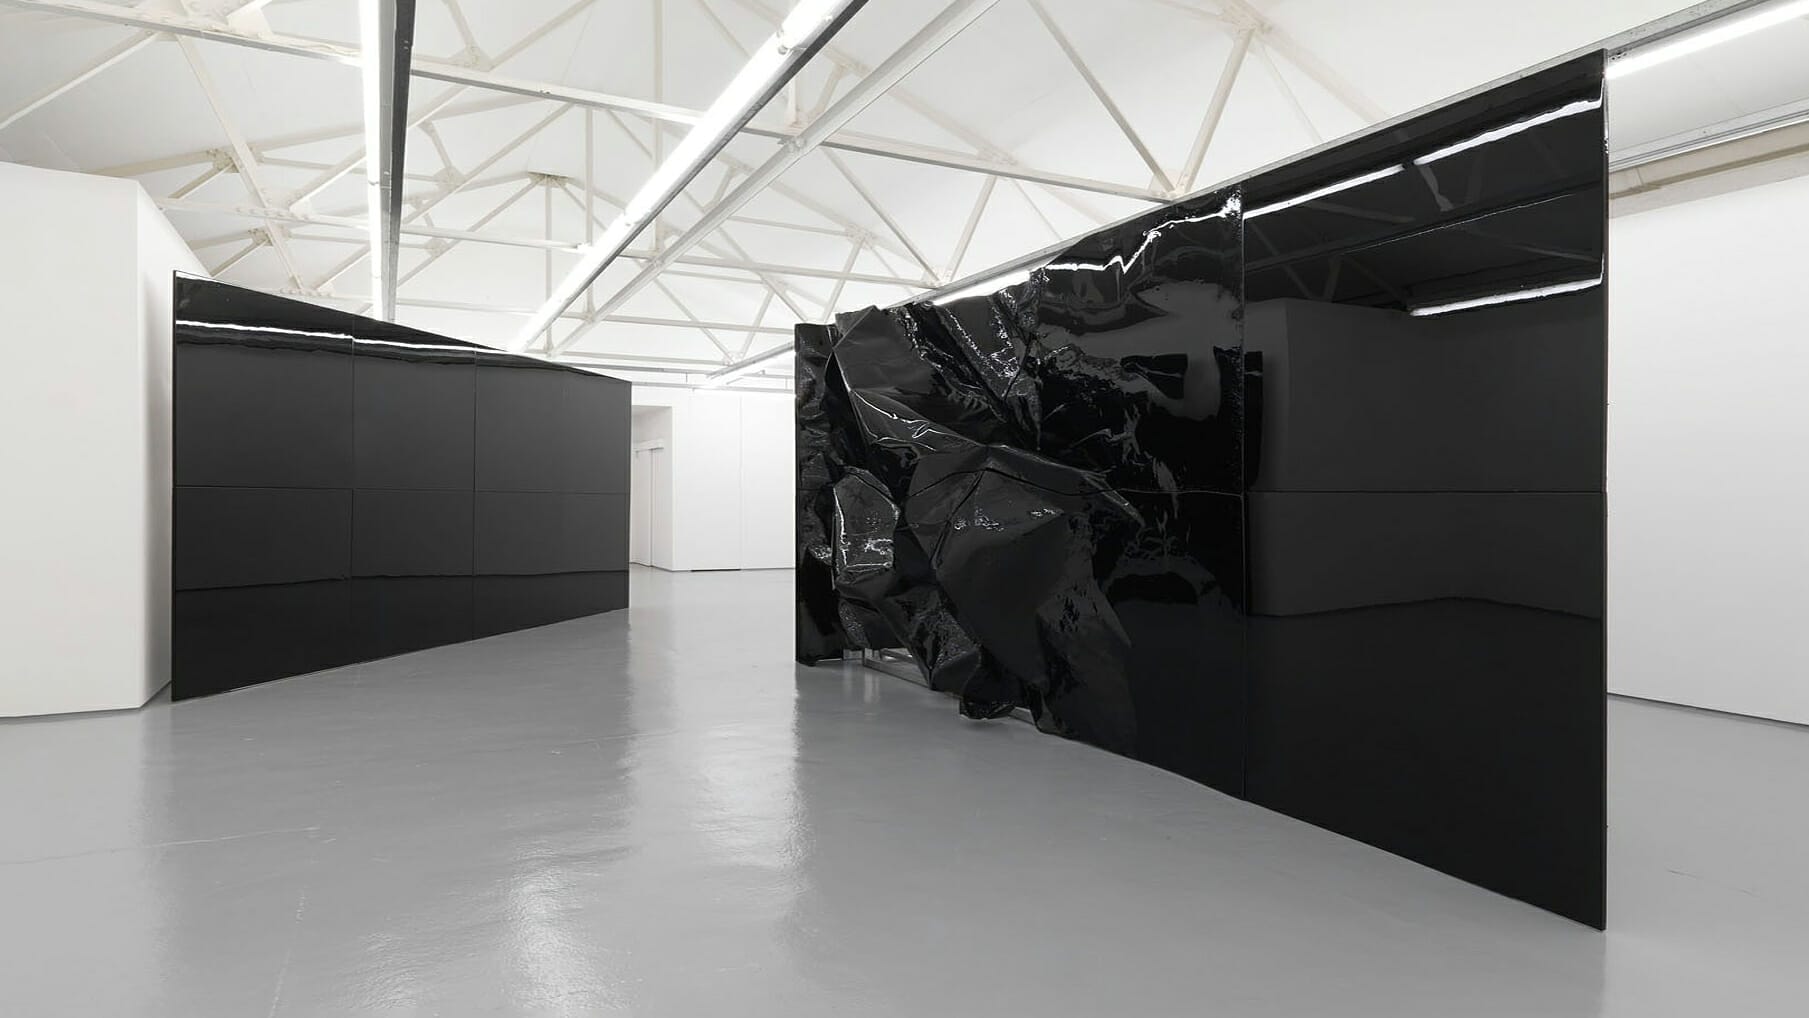 Istallation view, Banks Violette at Maureen Paley, London, 2008